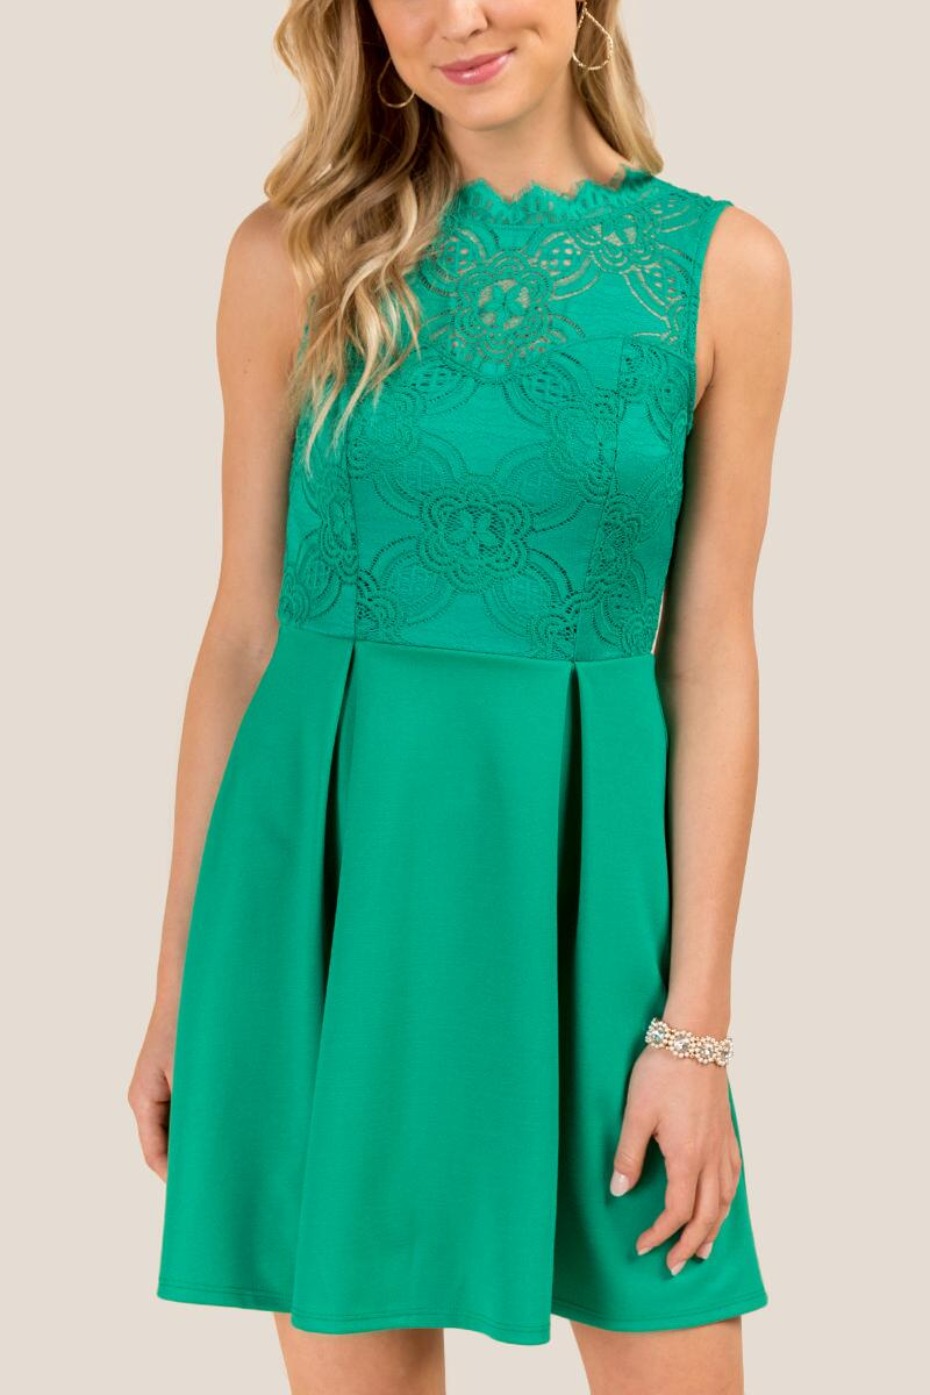 Francesca's Pleated A-line Dress in Jade